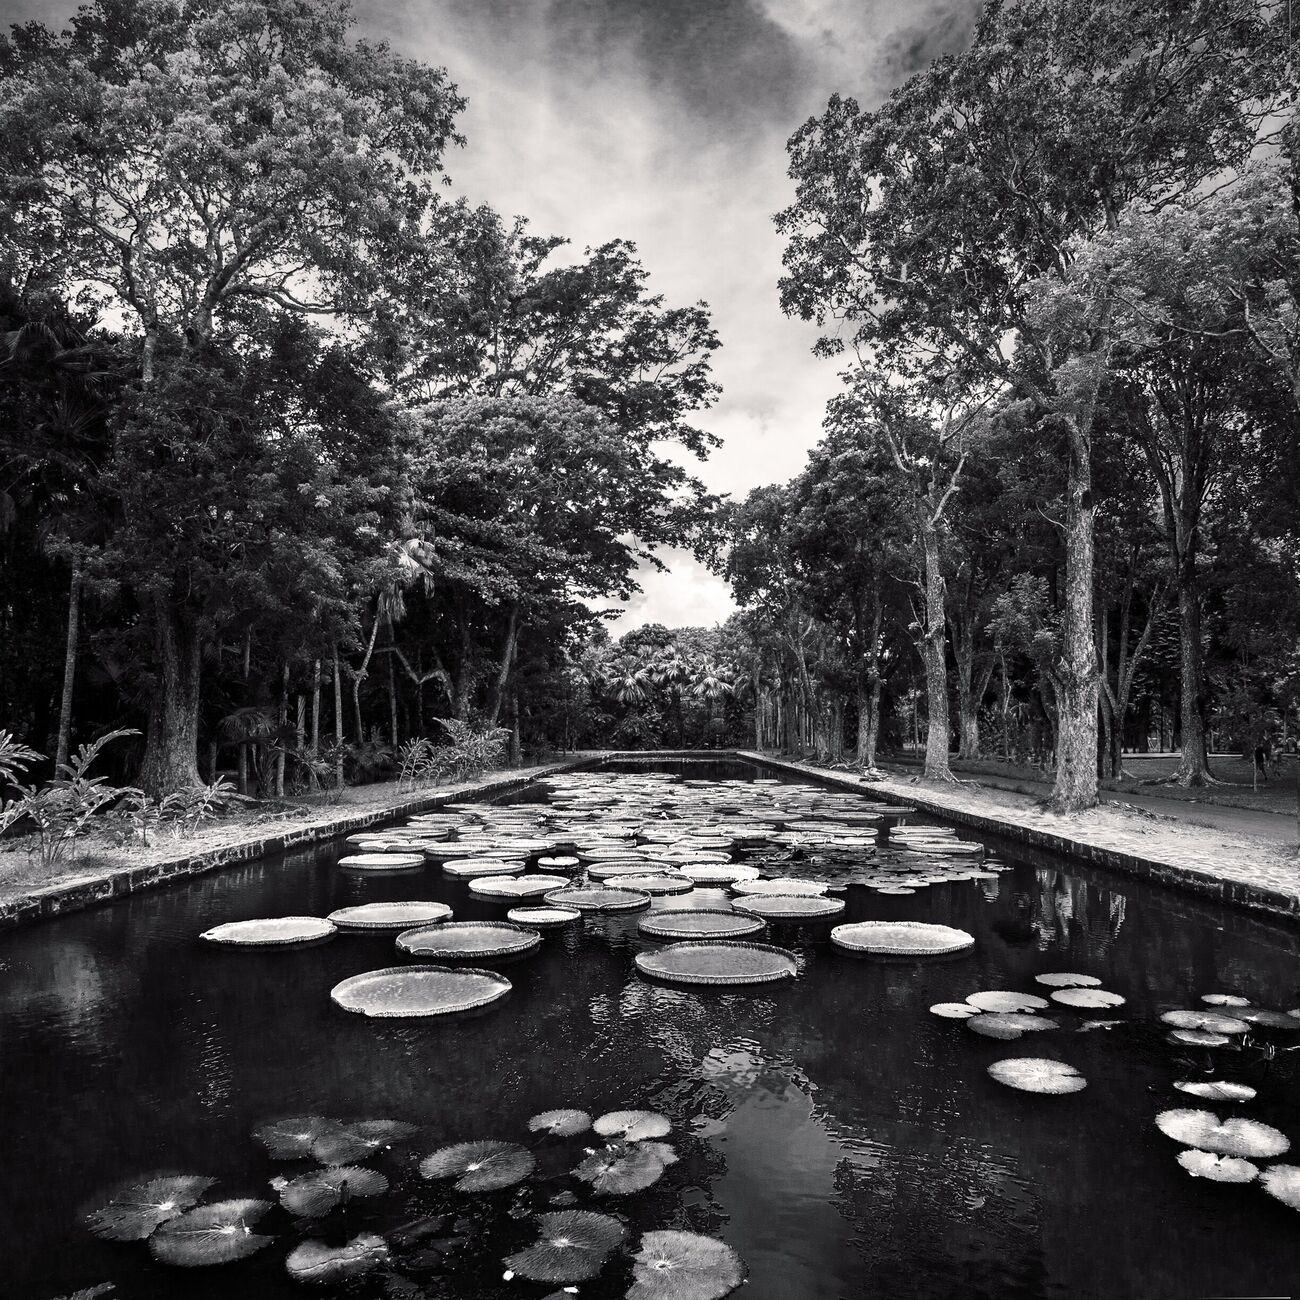 Giant Water Lilies, Pamplemousses Botanical Garden, Mauritius. March 2014. Ref-11439 - Denis Olivier Photography